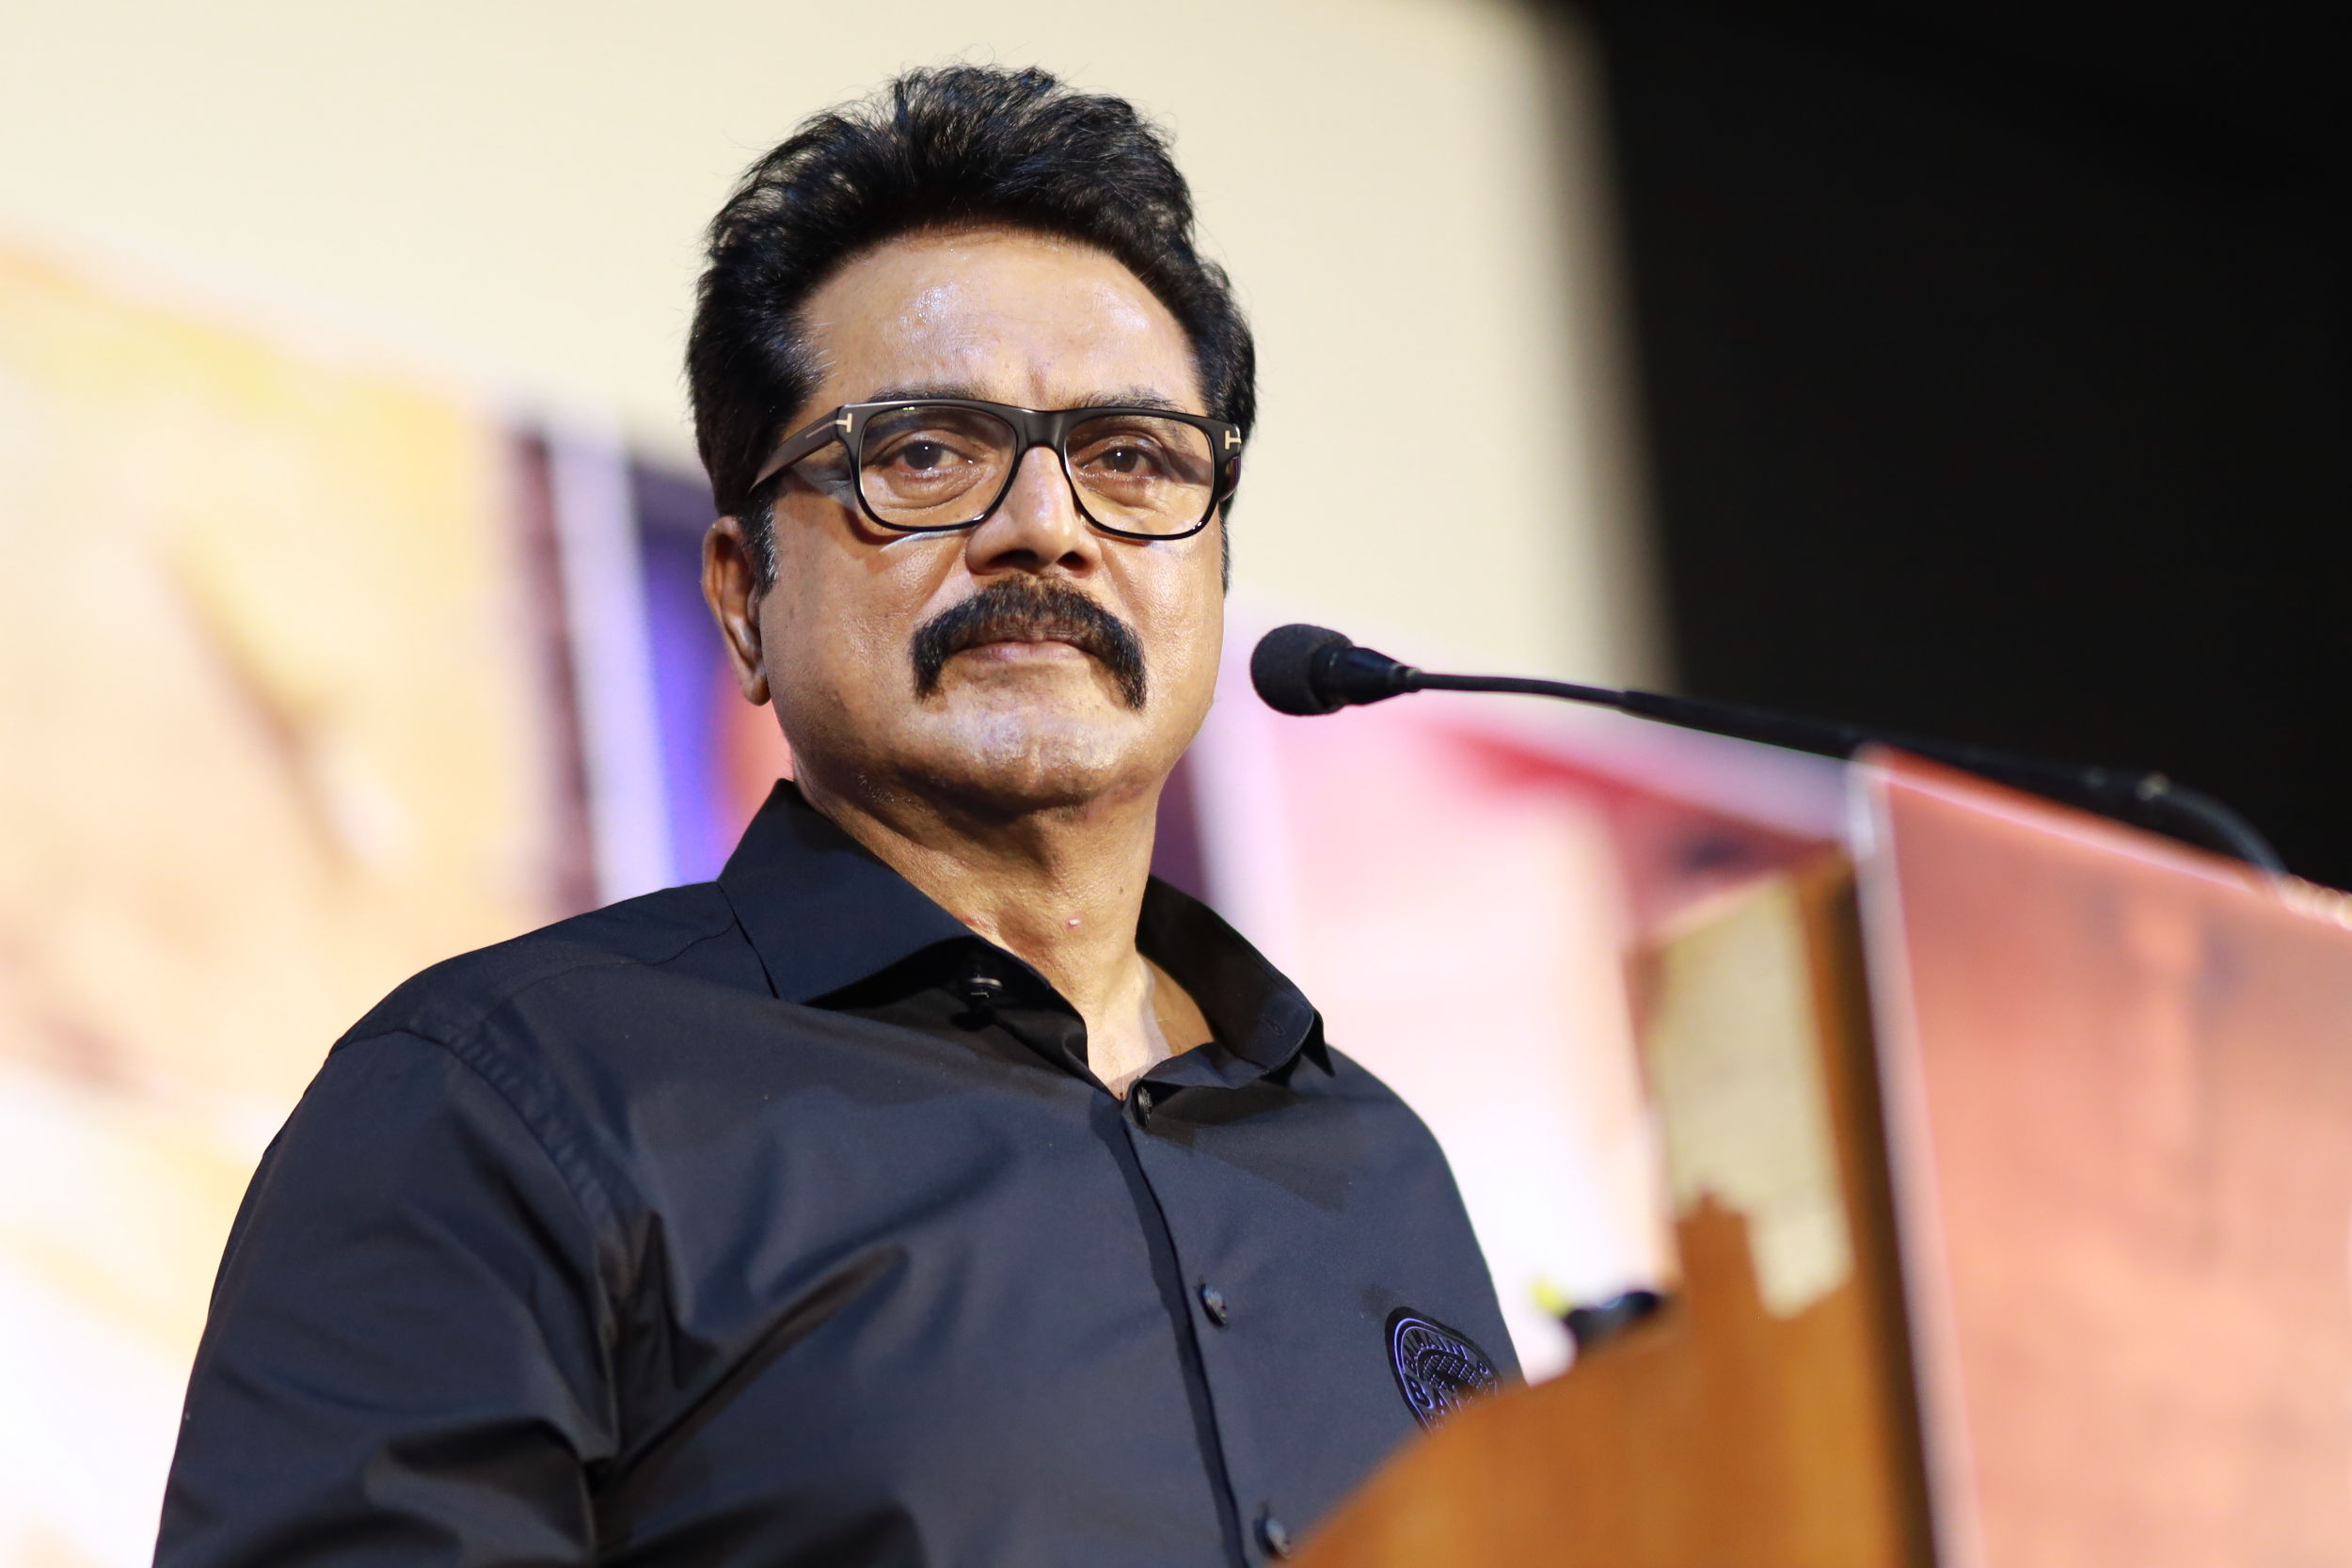 Actor Sarath Kumar is currently acting in more than 20 films